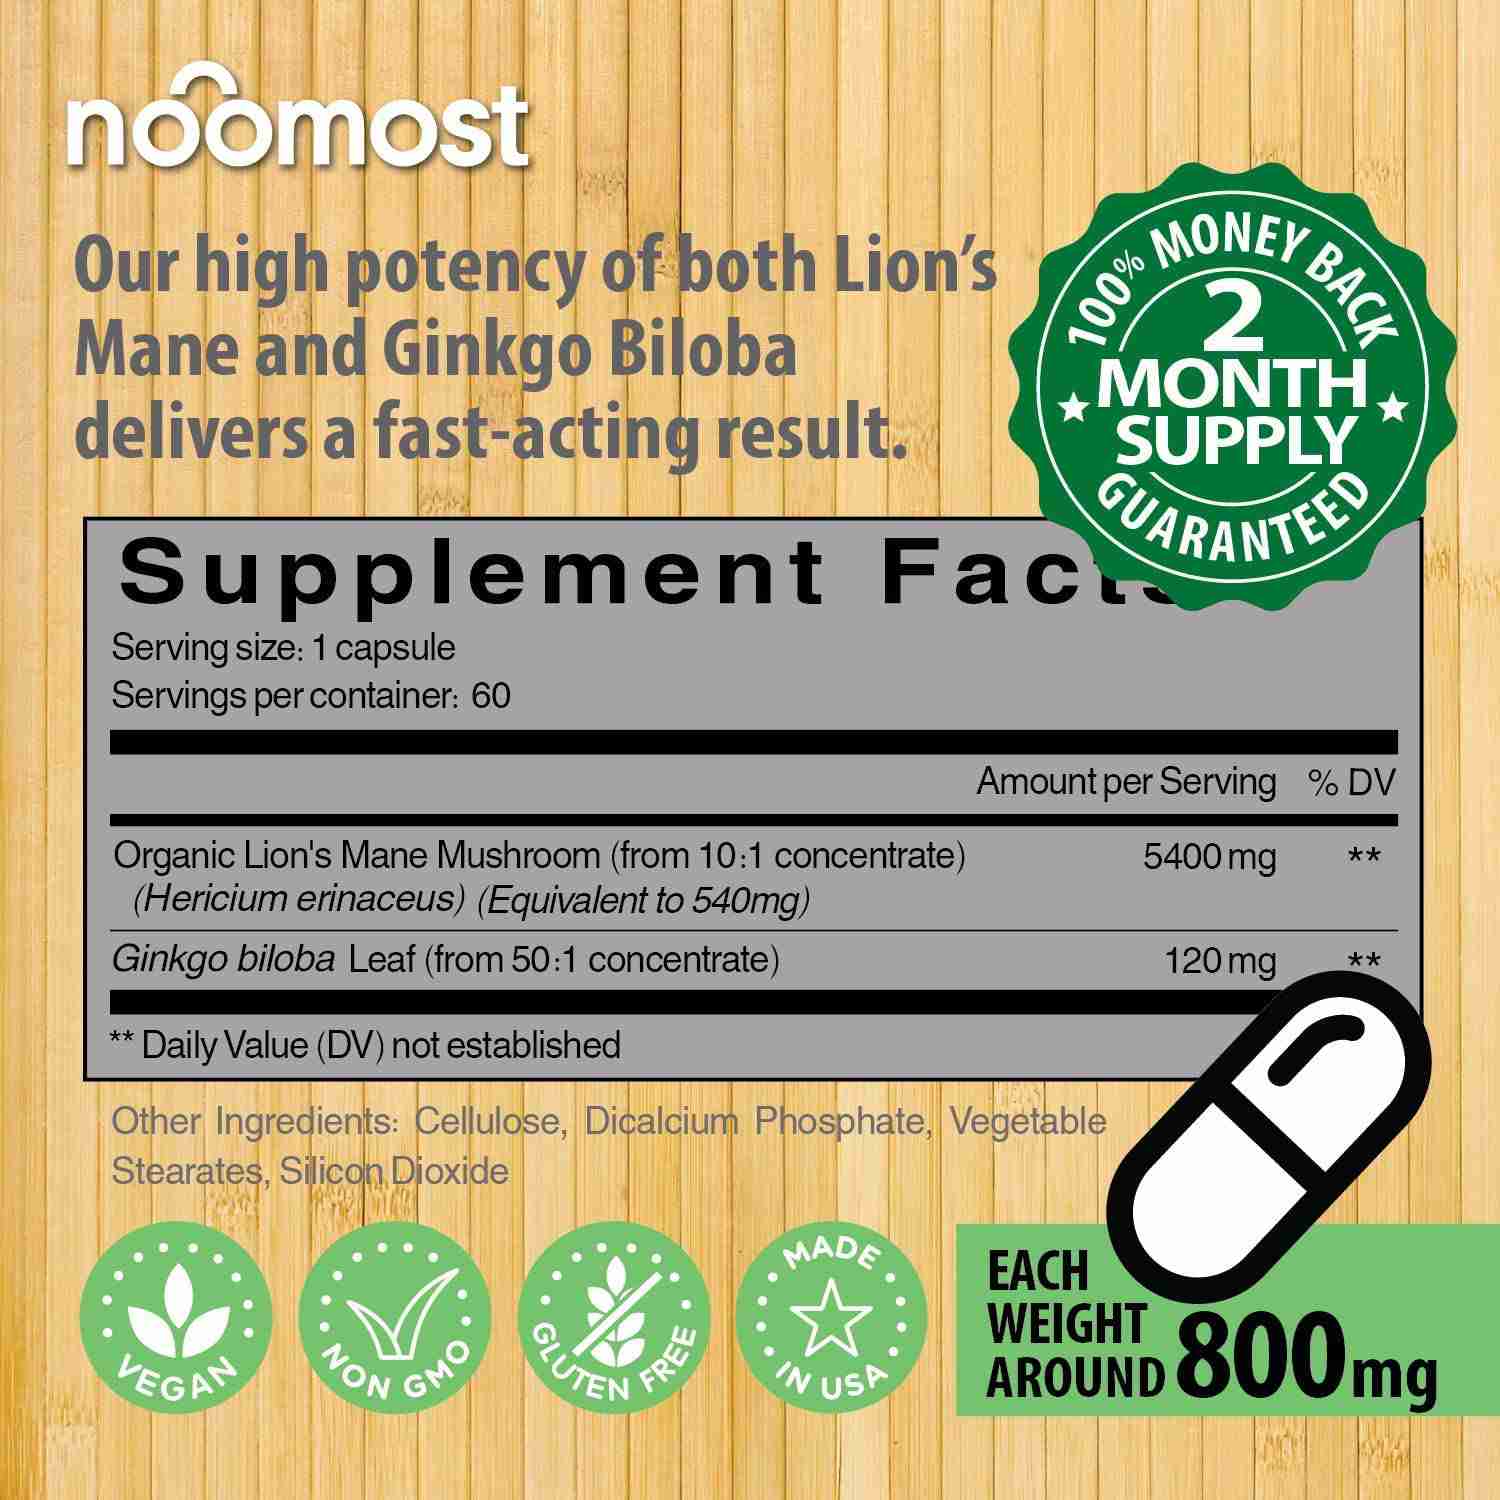 lions-mane-supplement for cheap